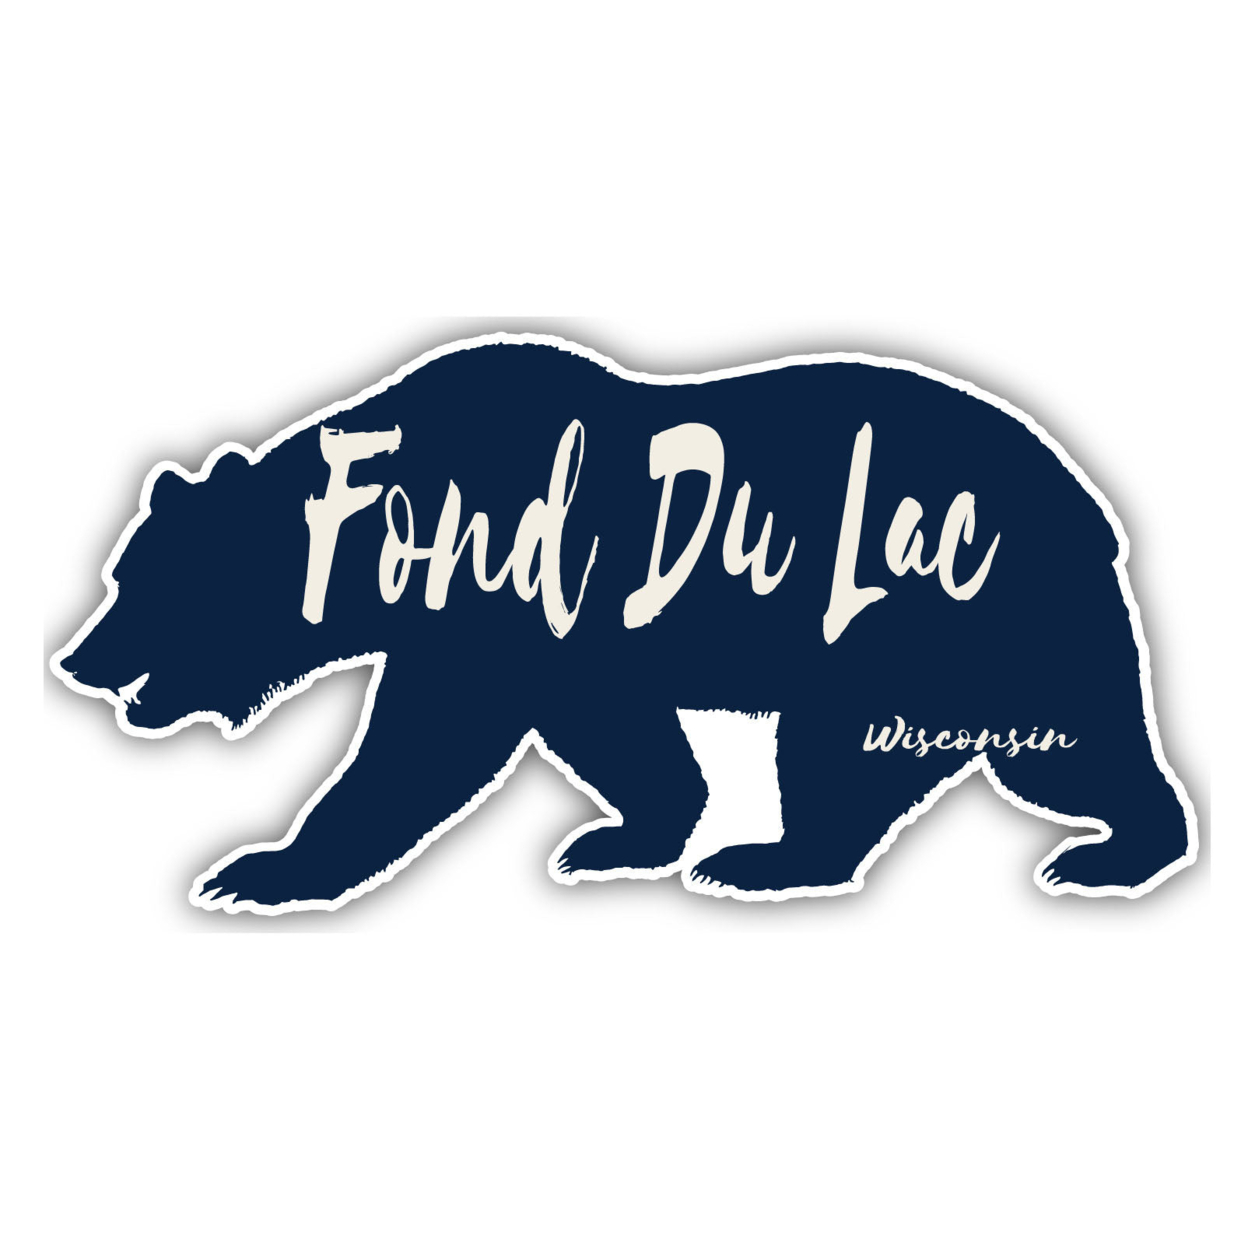 Fond Du Lac Wisconsin Souvenir Decorative Stickers (Choose Theme And Size) - Single Unit, 6-Inch, Great Outdoors